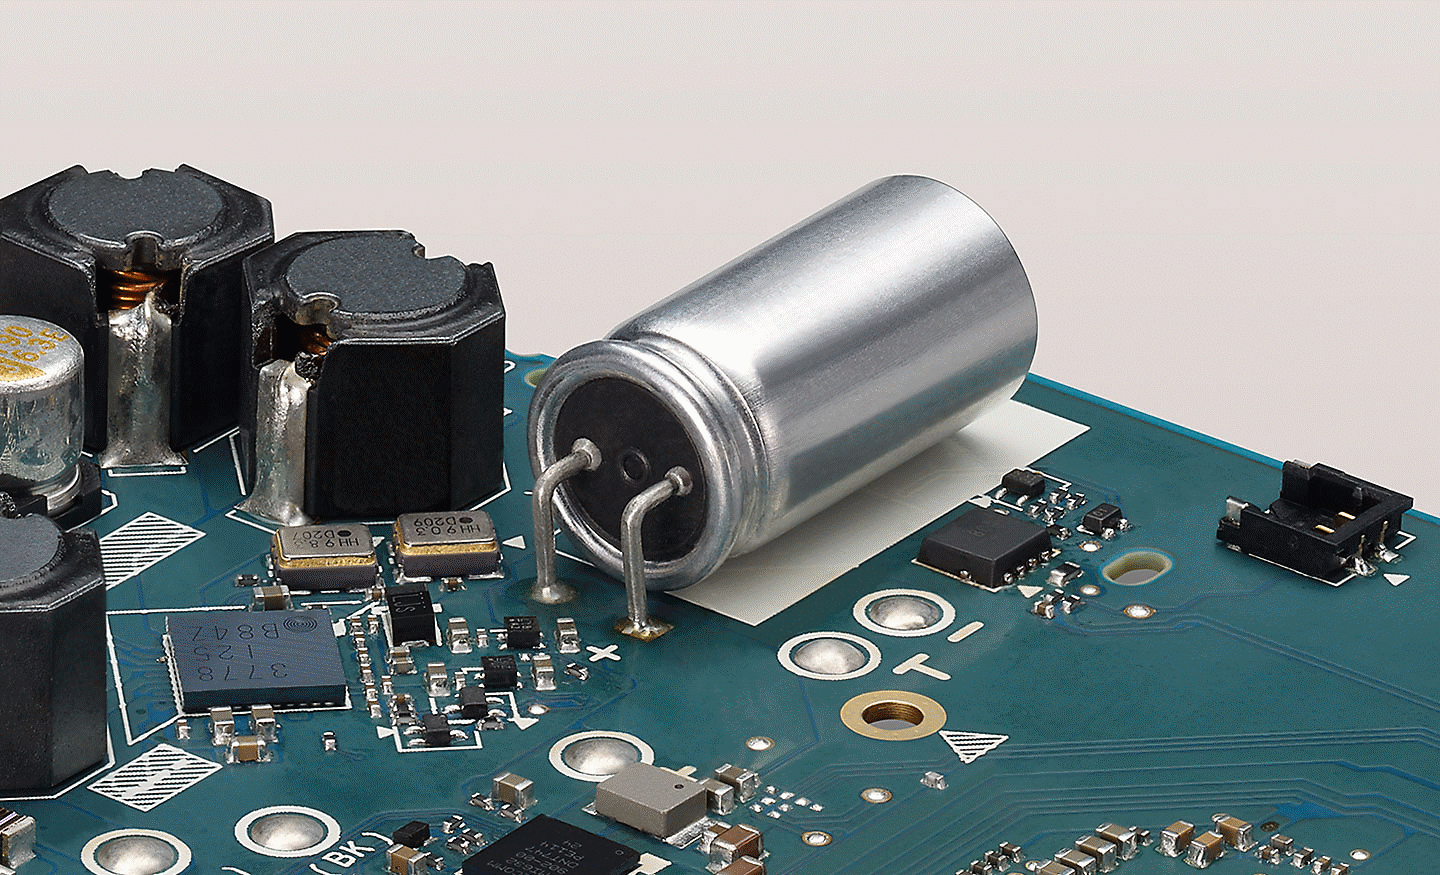 A close-up image of the NW-ZX707 large solid high-polymer capacitor.